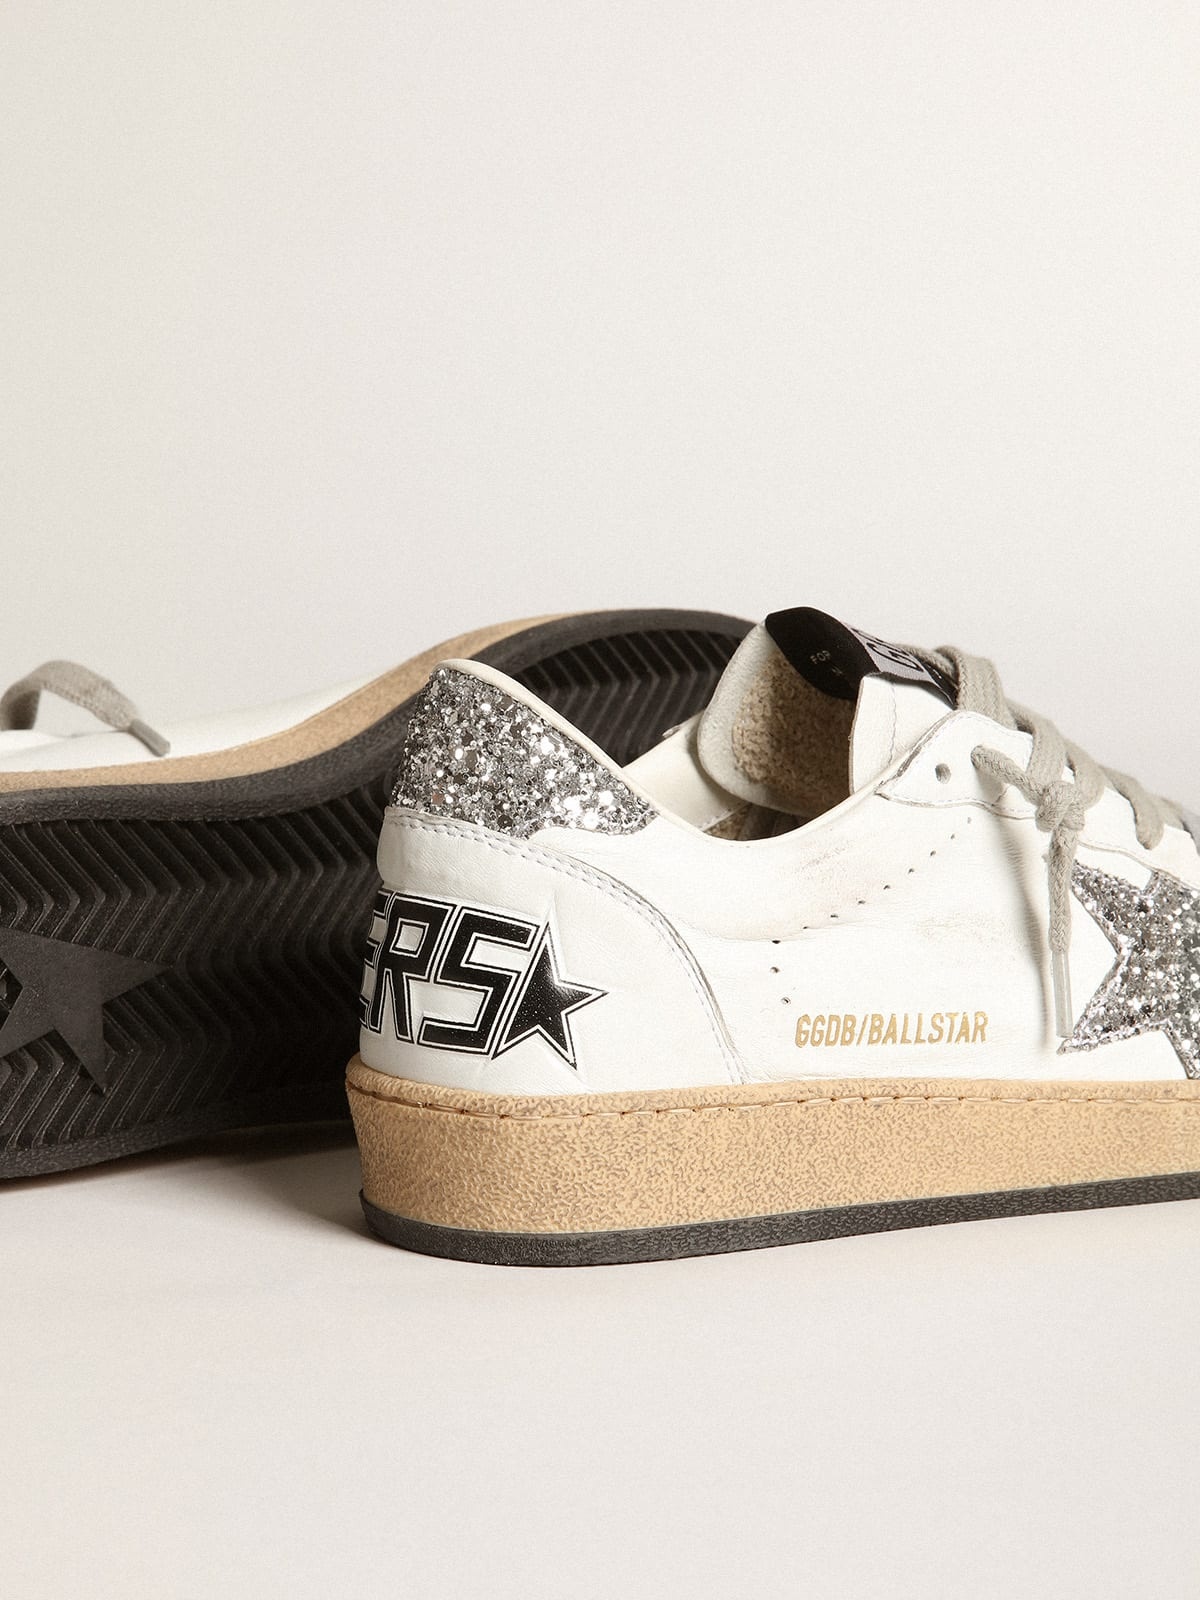 Ball Star sneakers in white nappa leather with silver glitter star and heel tab - 4